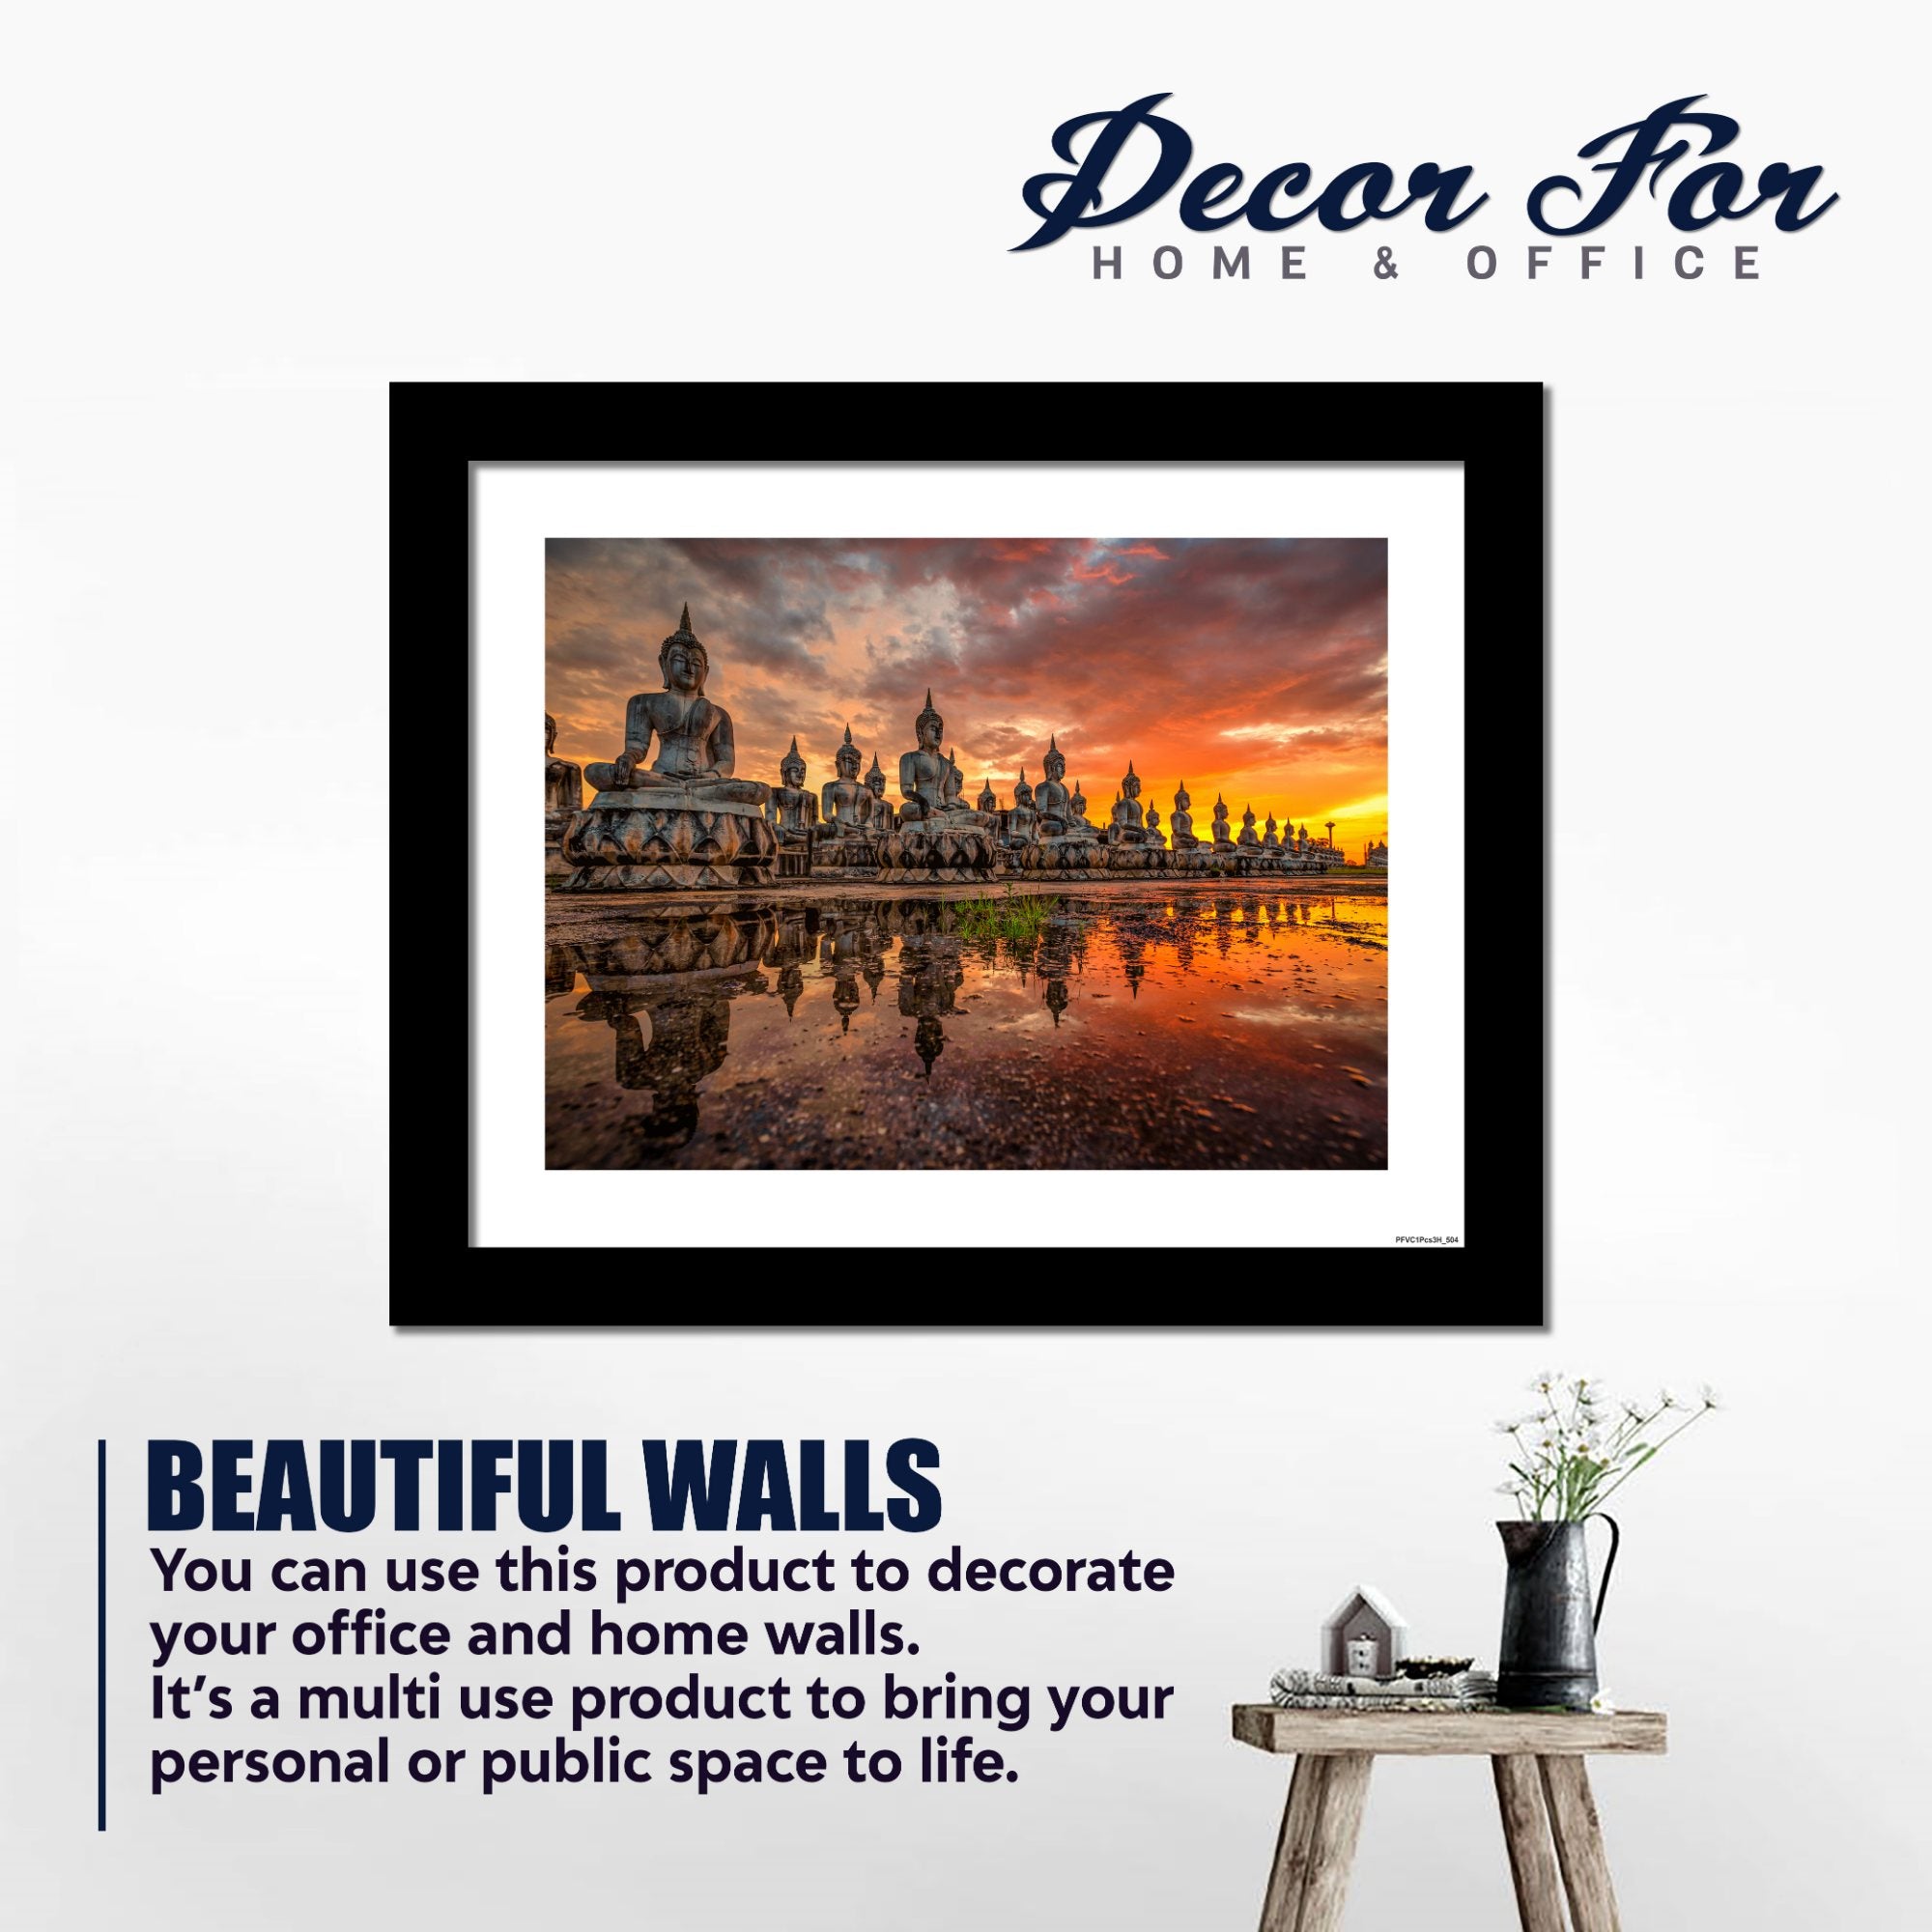 Quality Wall Frame Painting of Peaceful Lord Buddha's Statues